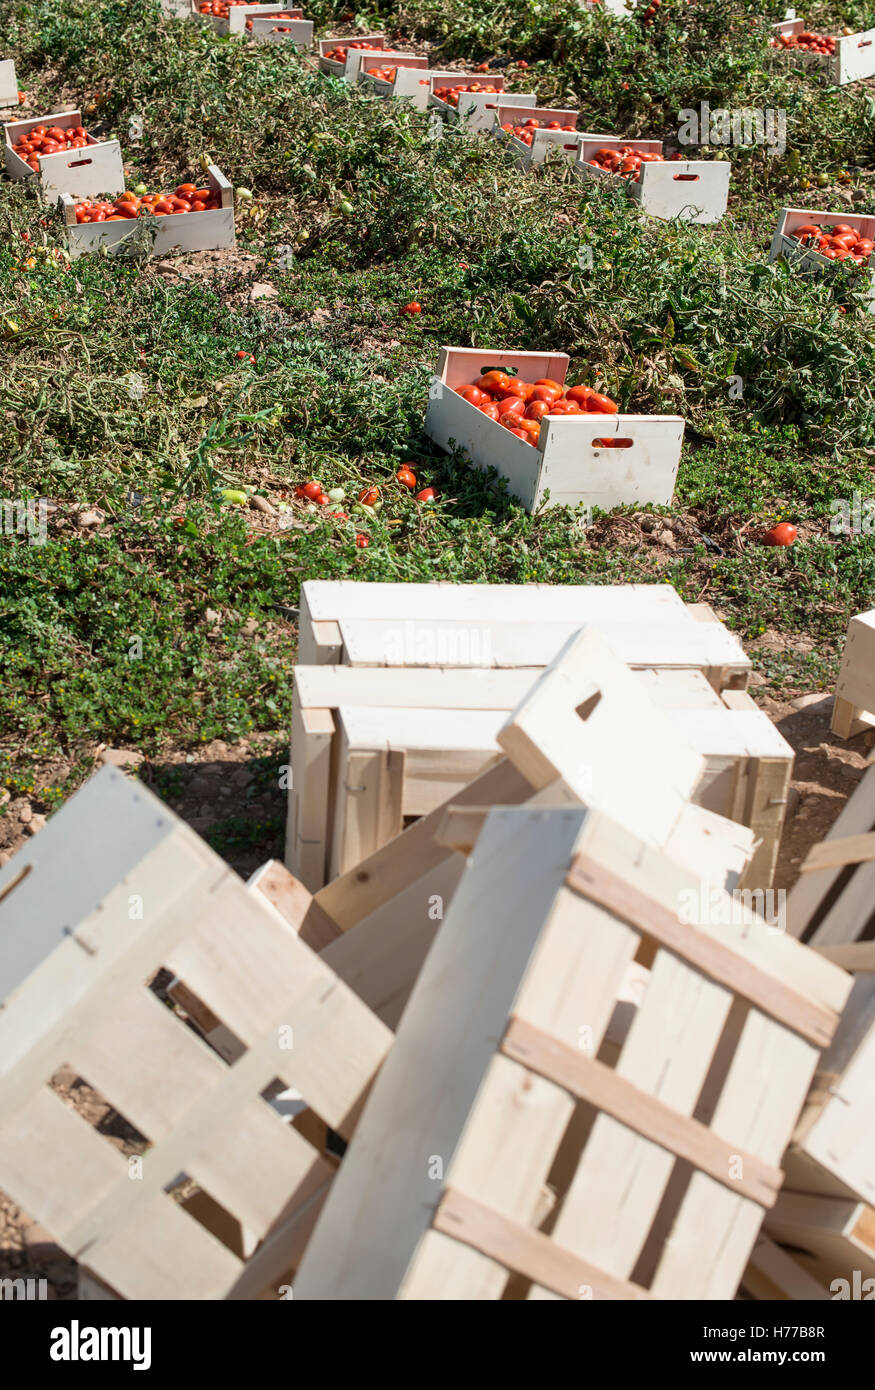 Crates of fresh tomatoes in a field Stock Photo